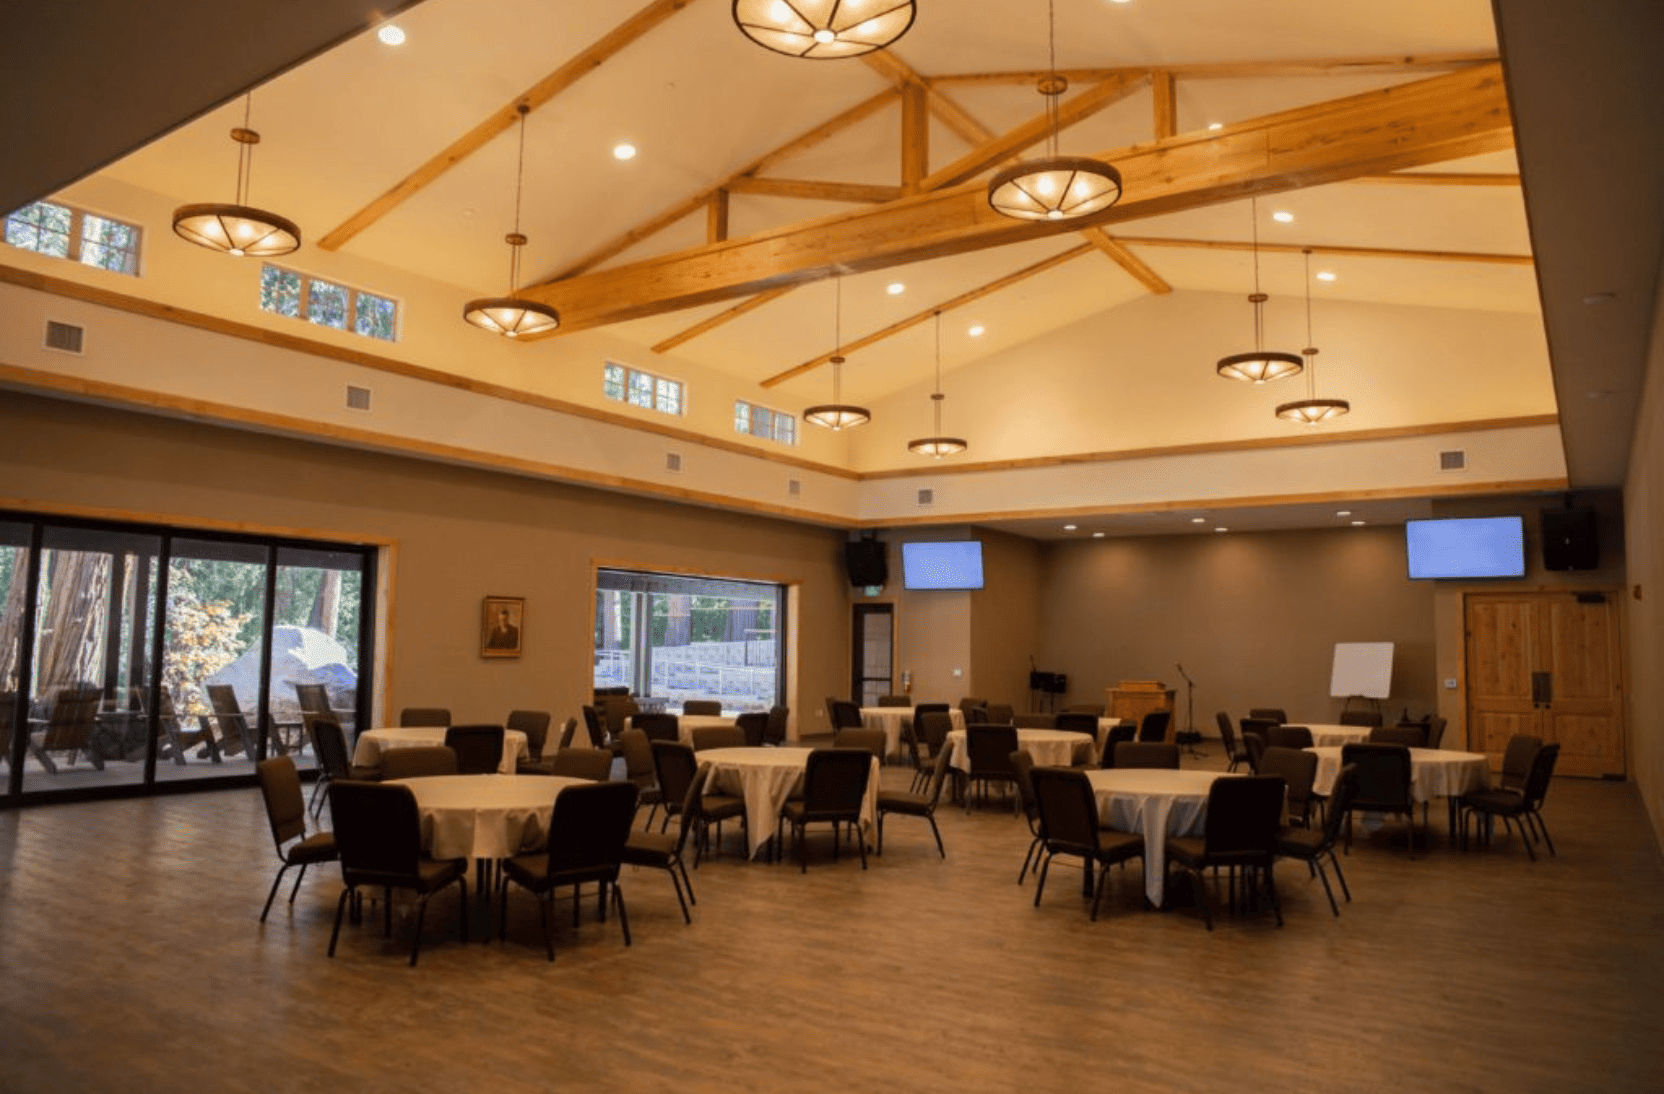 Indoor meeting space at Forest Home with round tables and chairs set up